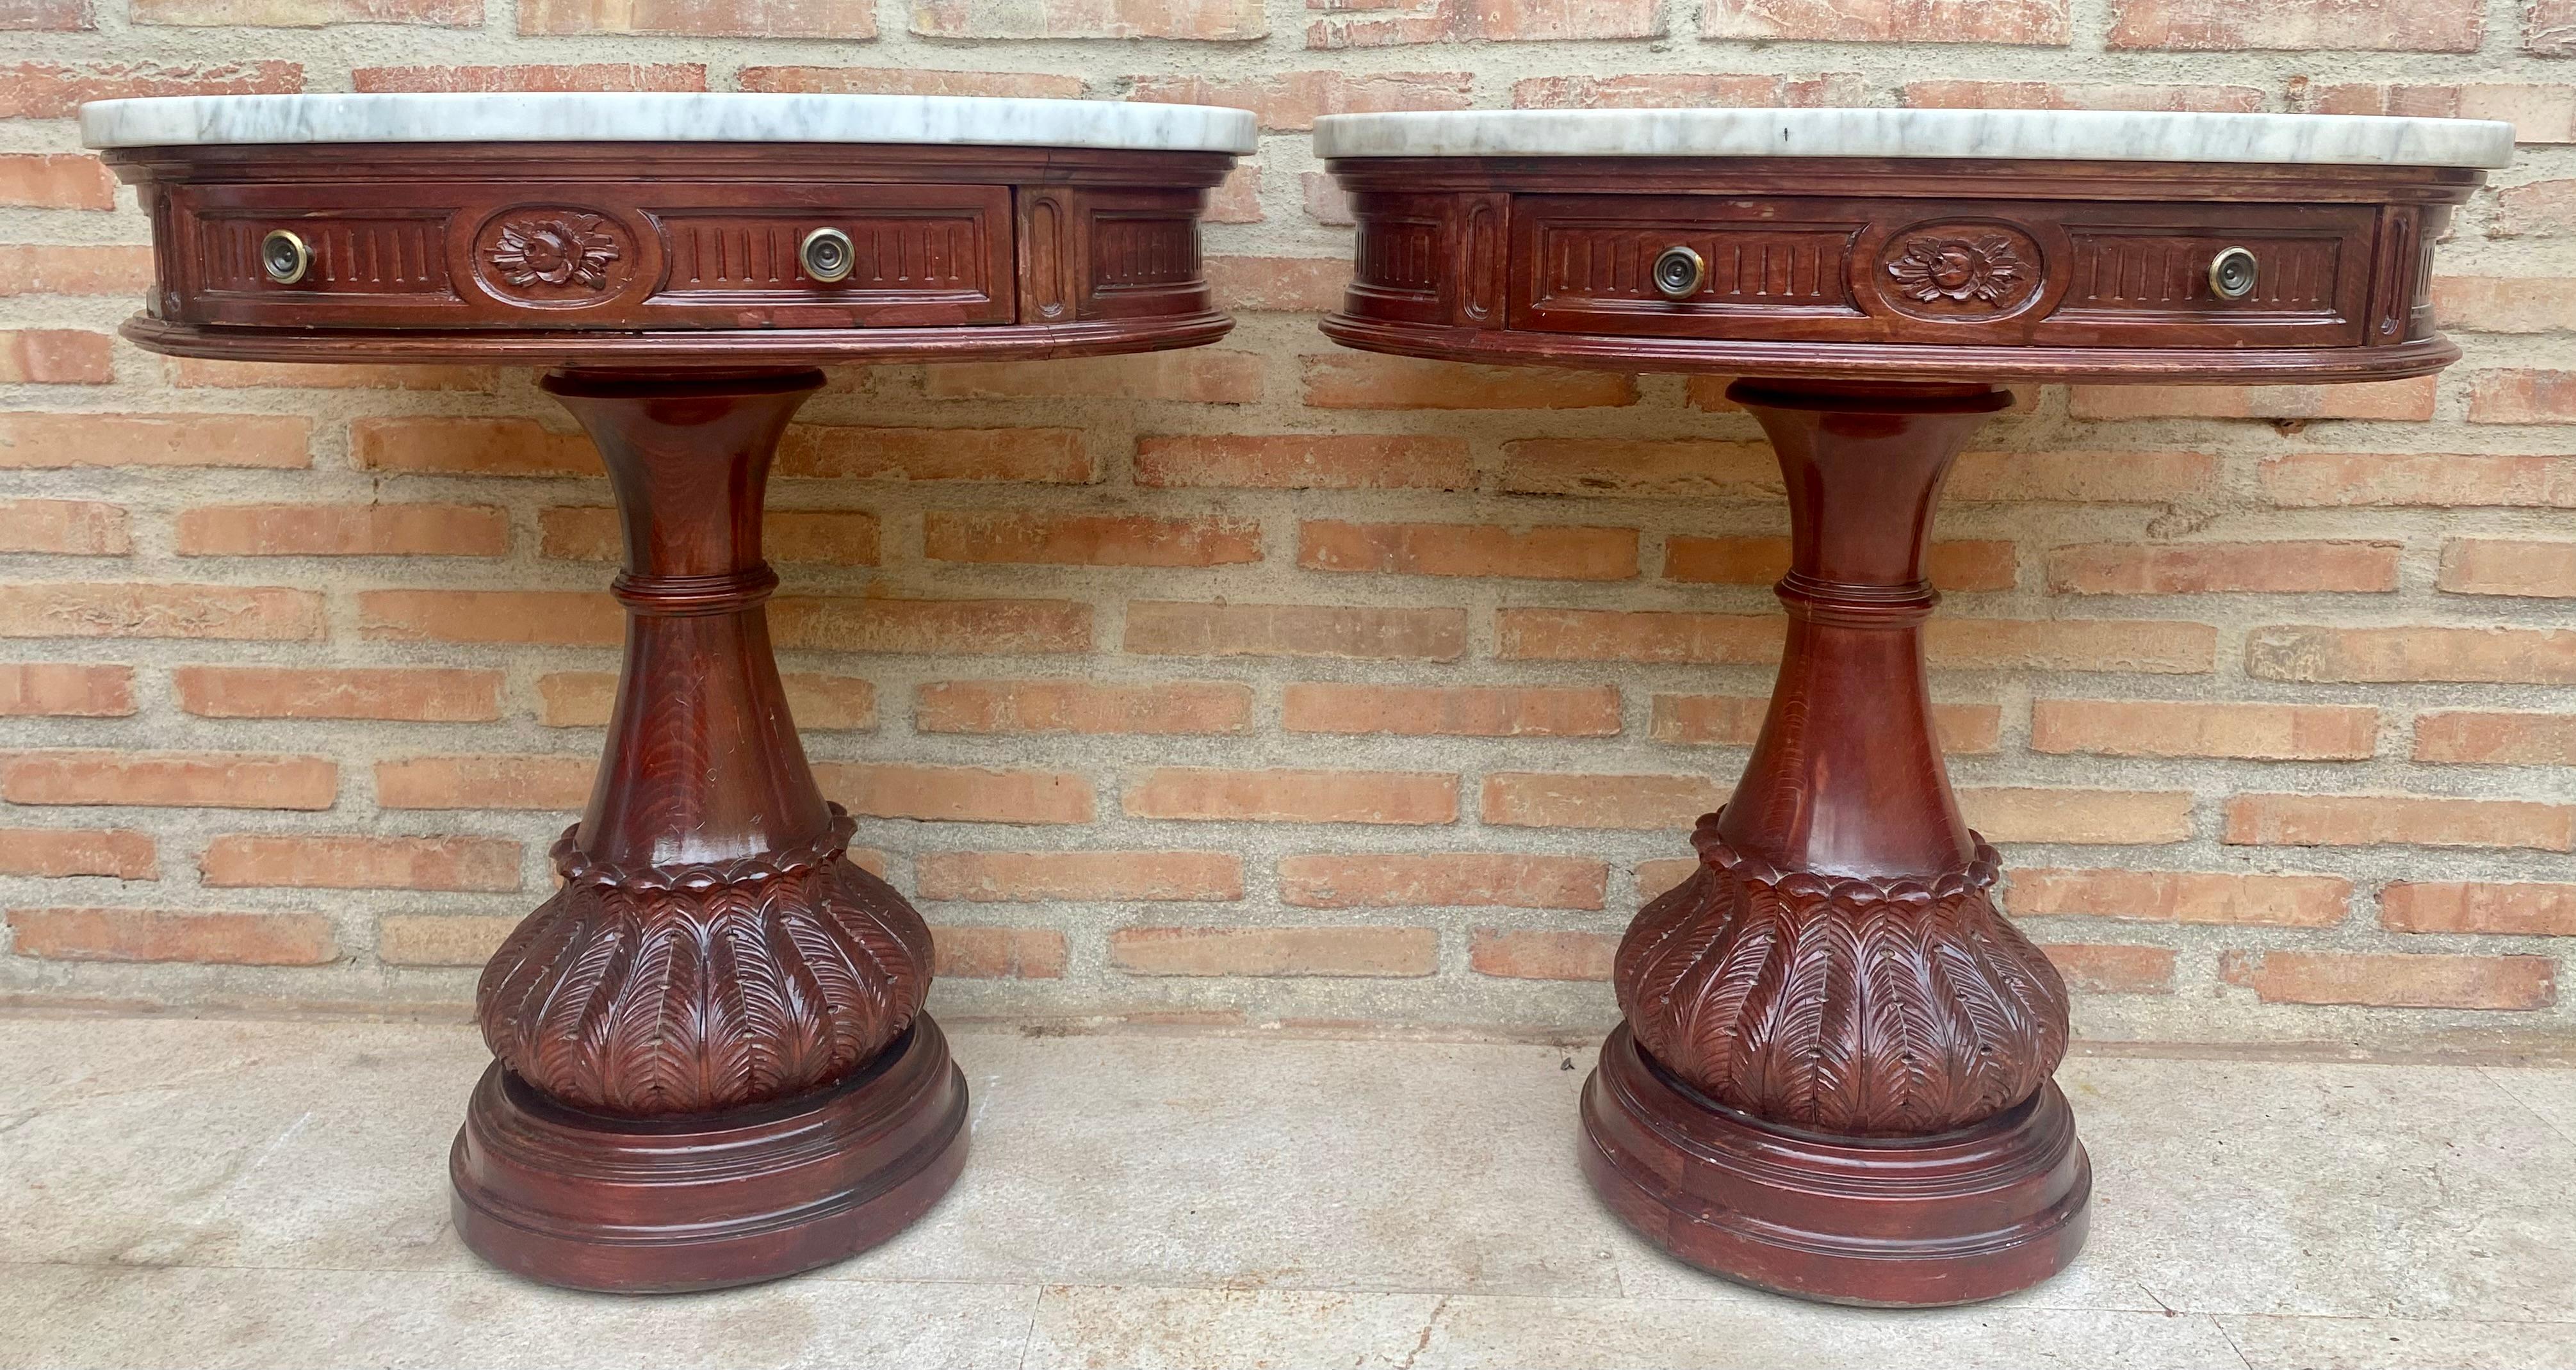 Pair of Carved Wood Demi Lune Side Tables or Nightstands with One Drawer and Marble Top.
Pair of Demi Lune side tables or bedside tables in carved wood with one drawer and marble top.
Beautiful crescent-shaped bedside tables with white marble top